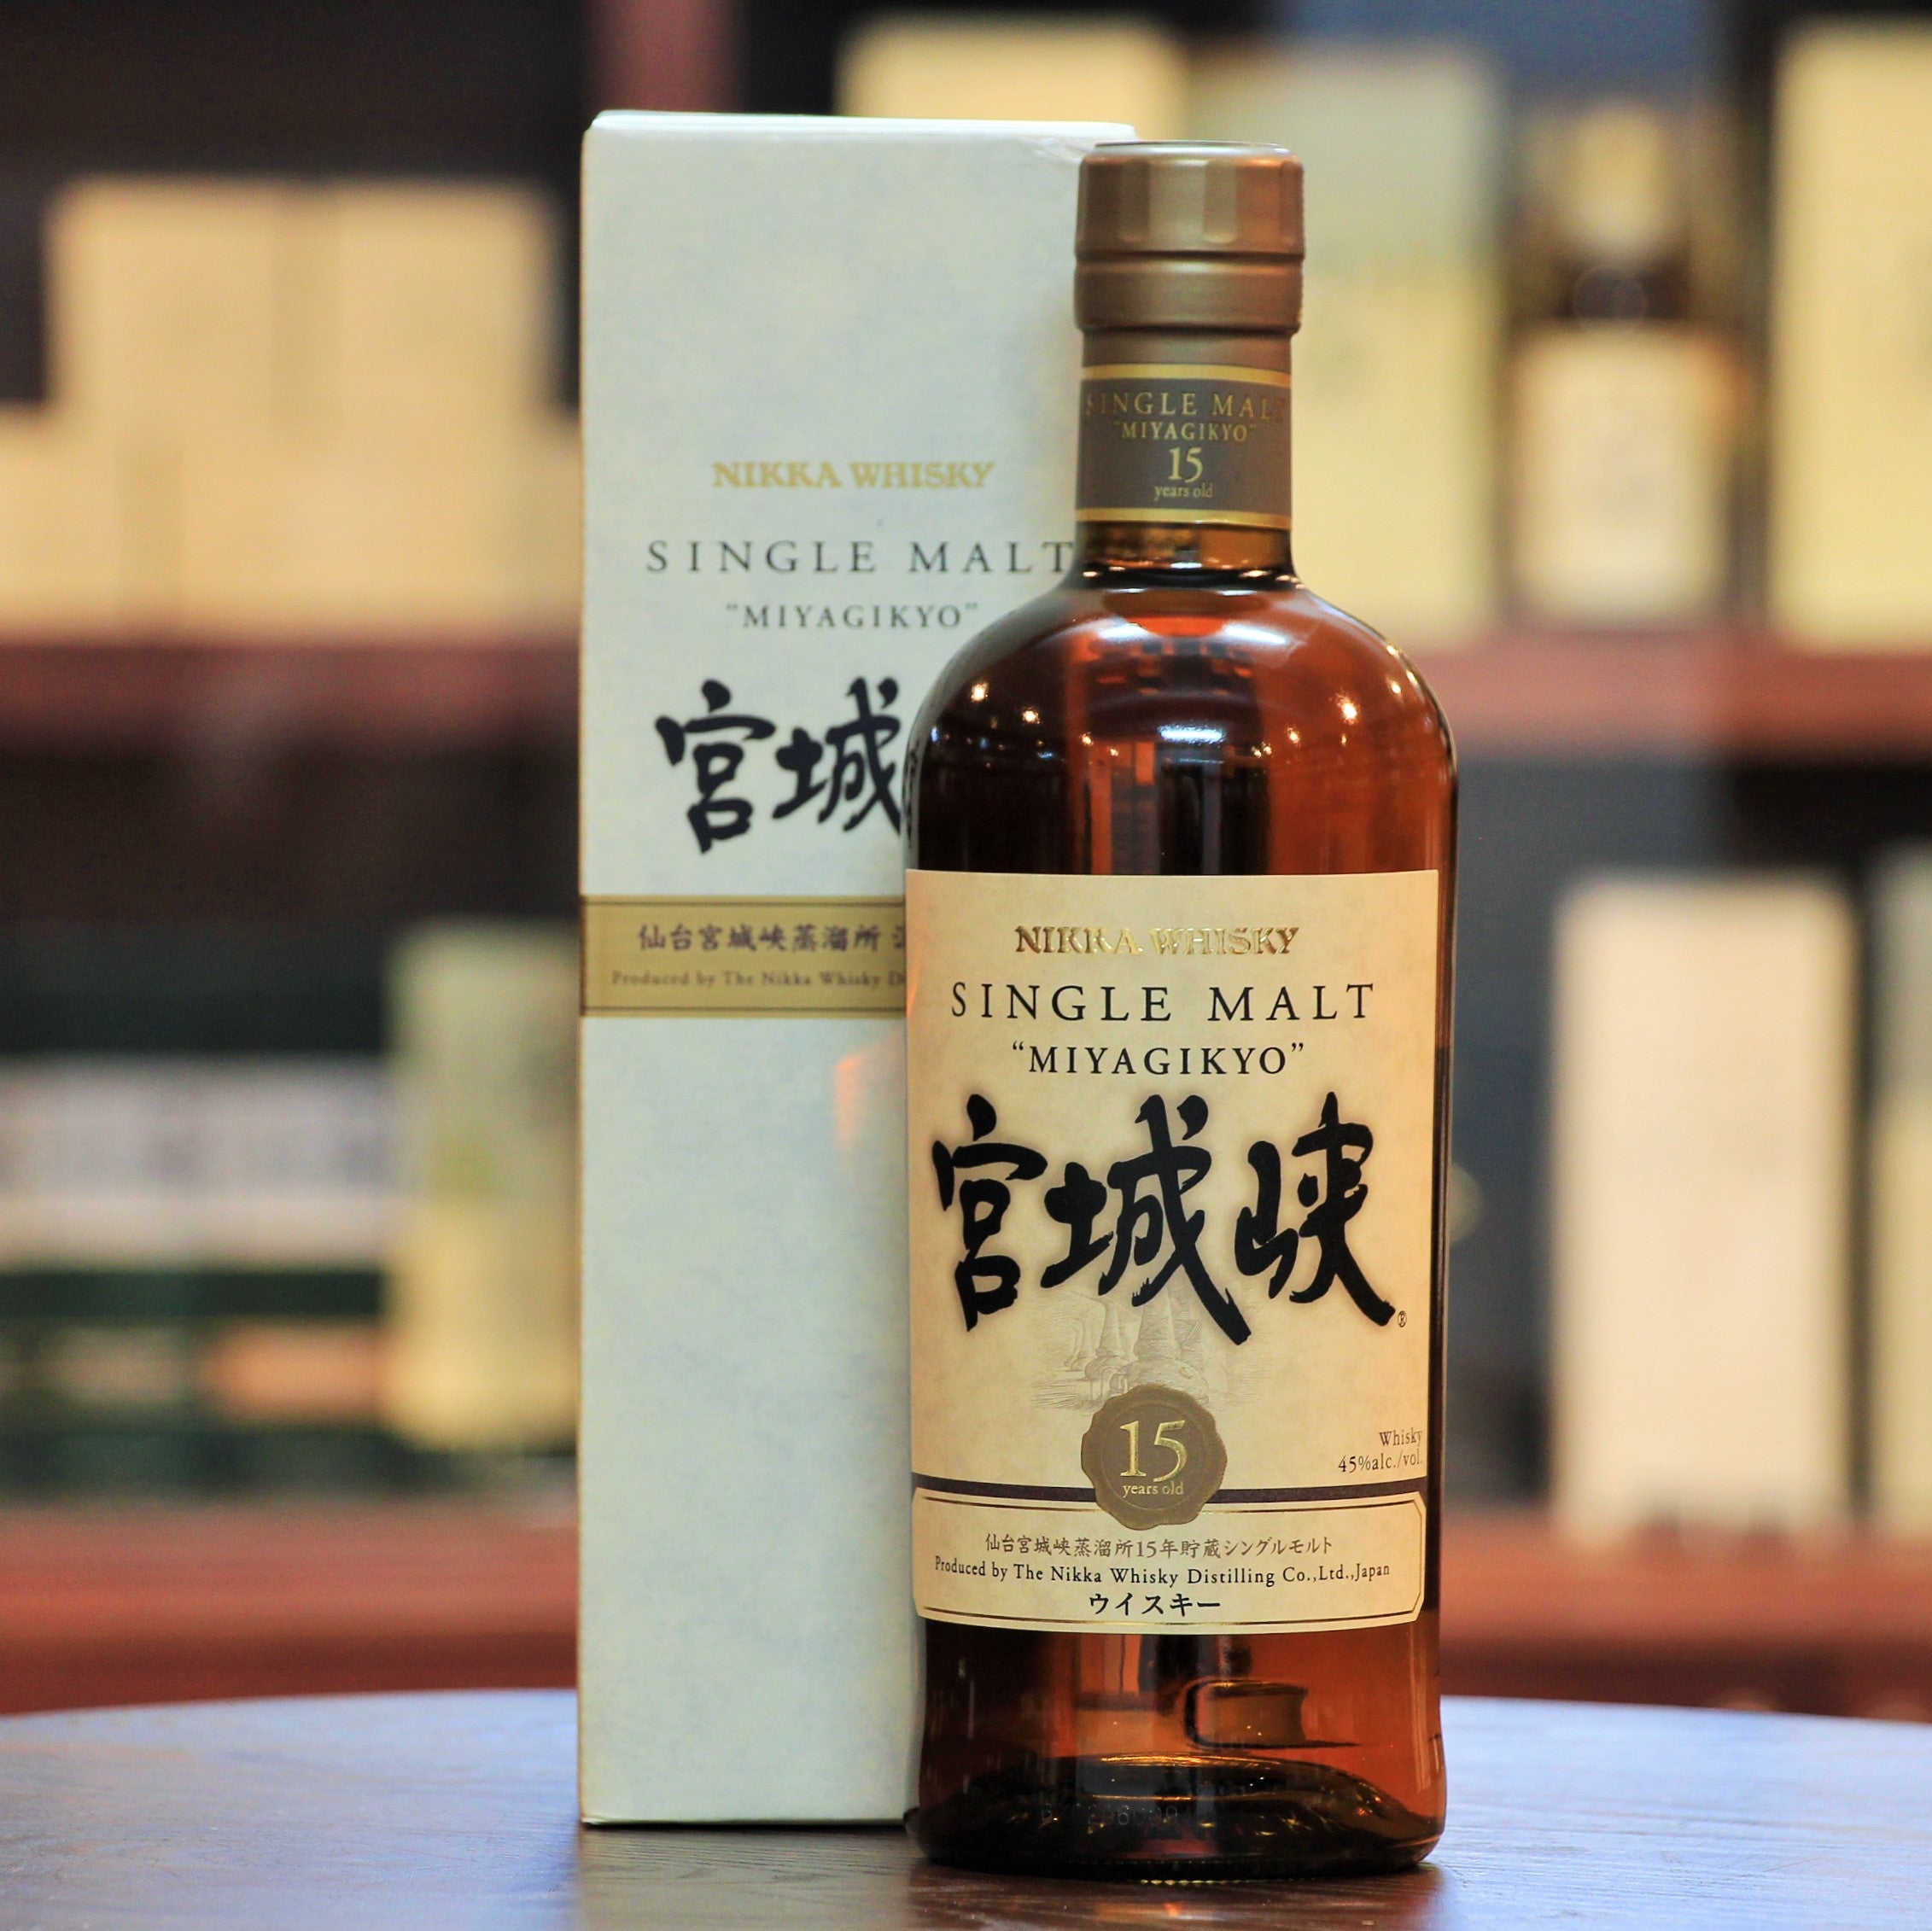 Miyagikyo 15 Years Single Malt Whisky, The oldest aged whisky from the Miyagikyo range, this has already been discontinued. Produced from mild and virtually unpeated malt, this whisky starts off with apples and sweet oranges with oaky/earthy notes. The location for the Miyagikyo distillery was chosen for its high humidity levels.